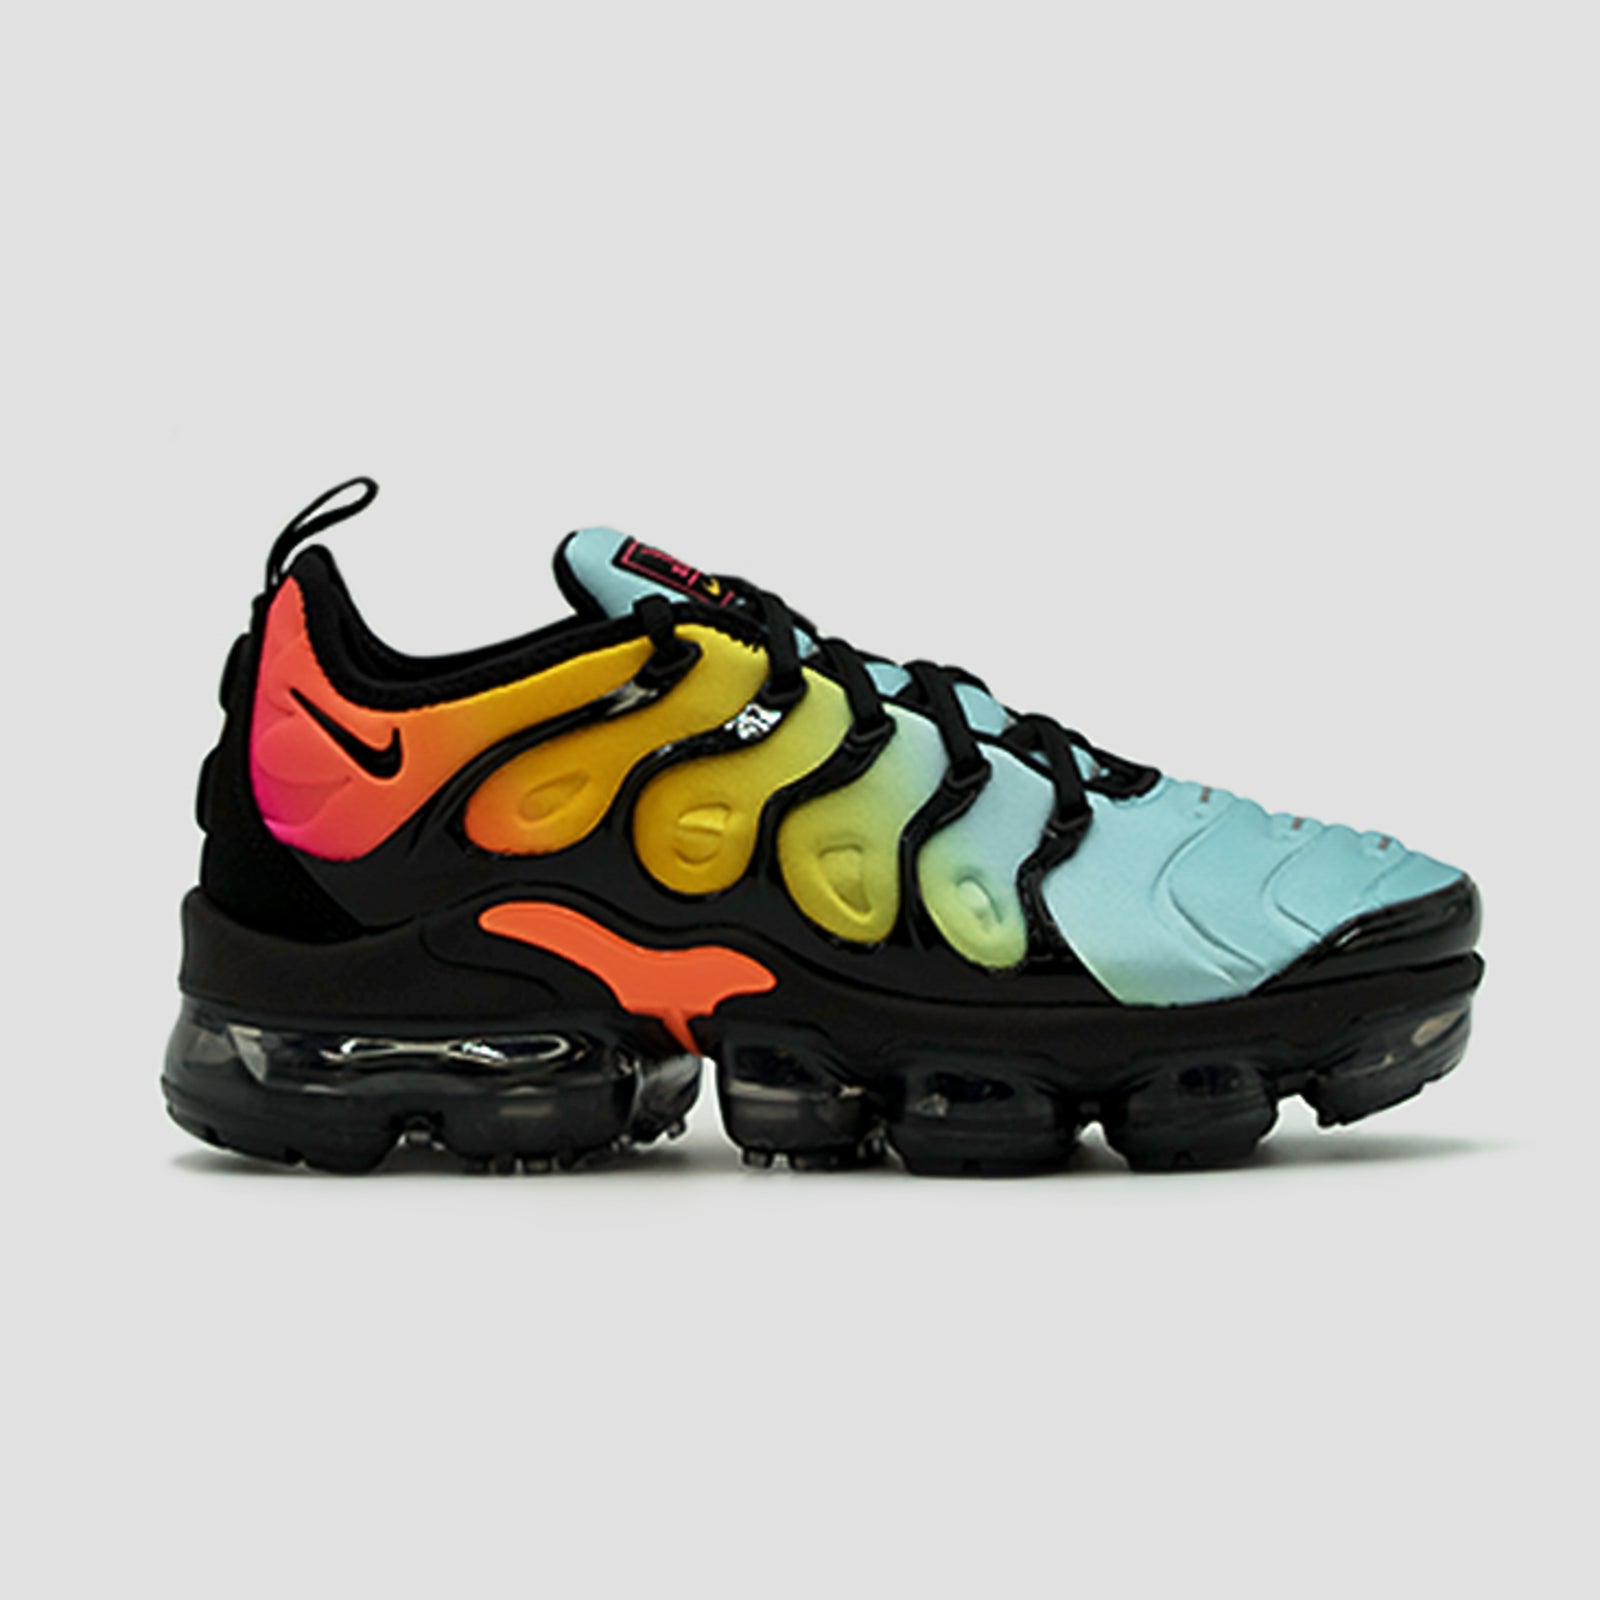 Womens Nike Air Vapormax Plus Bleached Aqua Available In Store Now Nohble